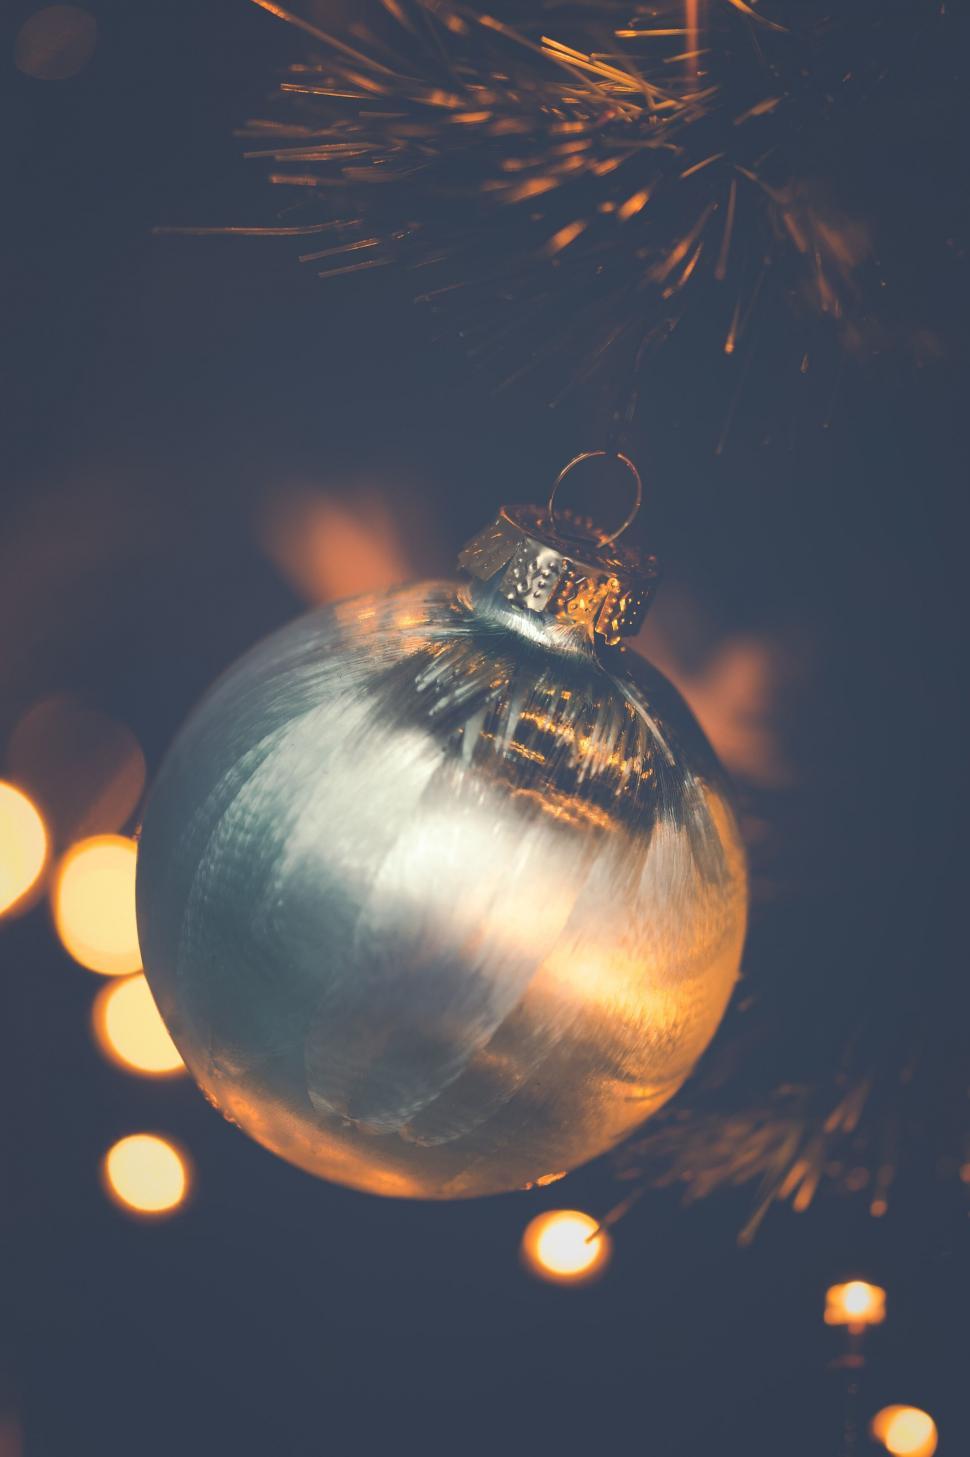 Free Image of Christmas bauble on a twinkling tree 